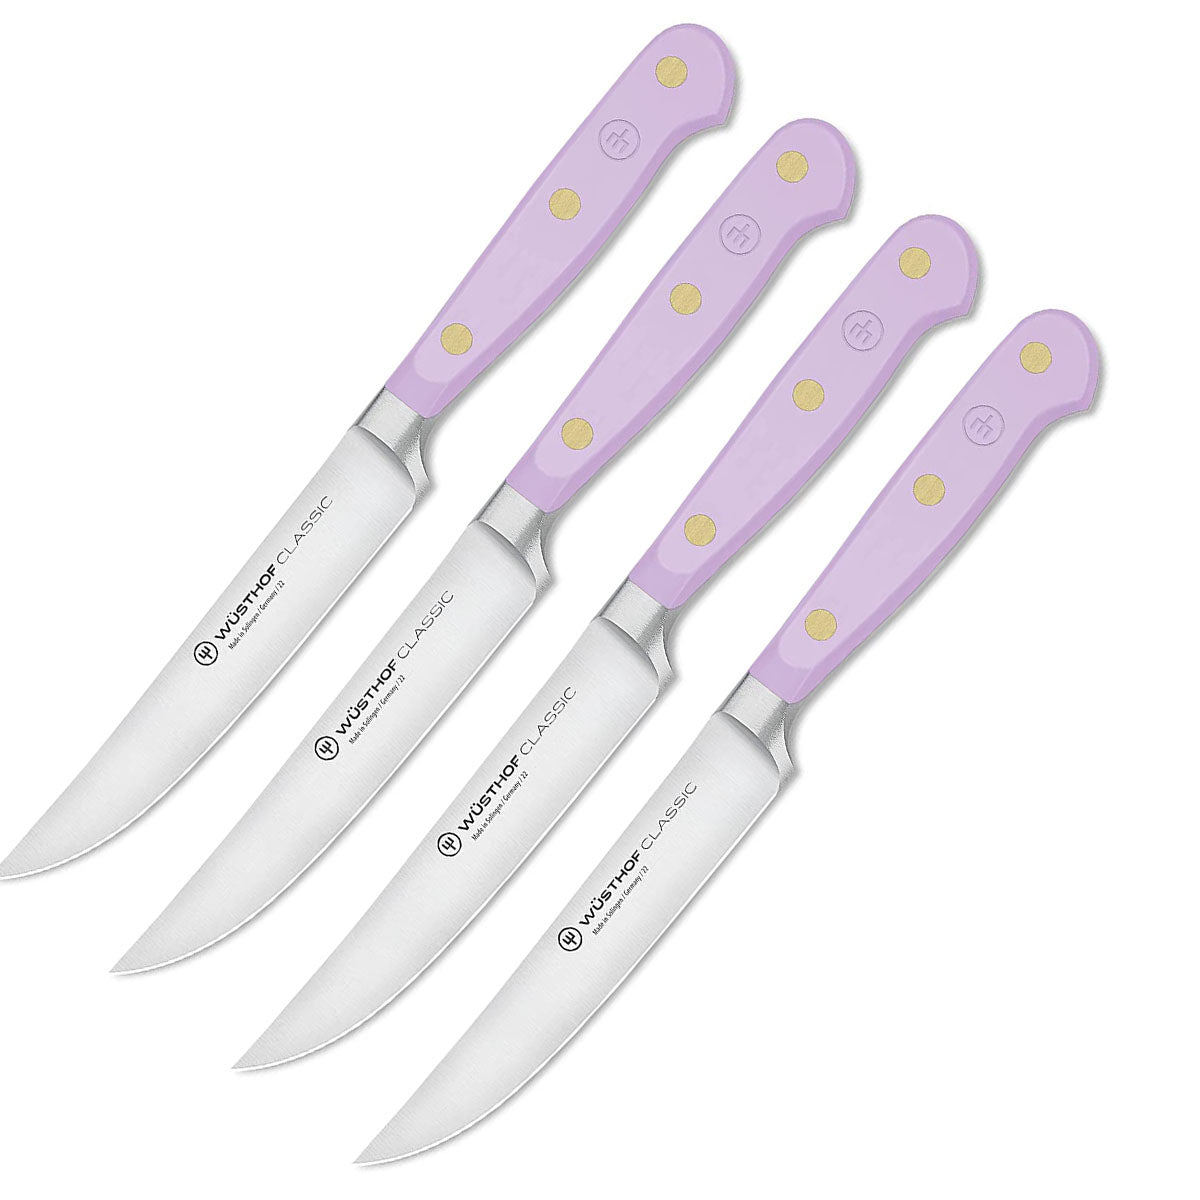 Wusthof Classic Steak Knife Set - 4 Piece Purple Yam – Cutlery and More